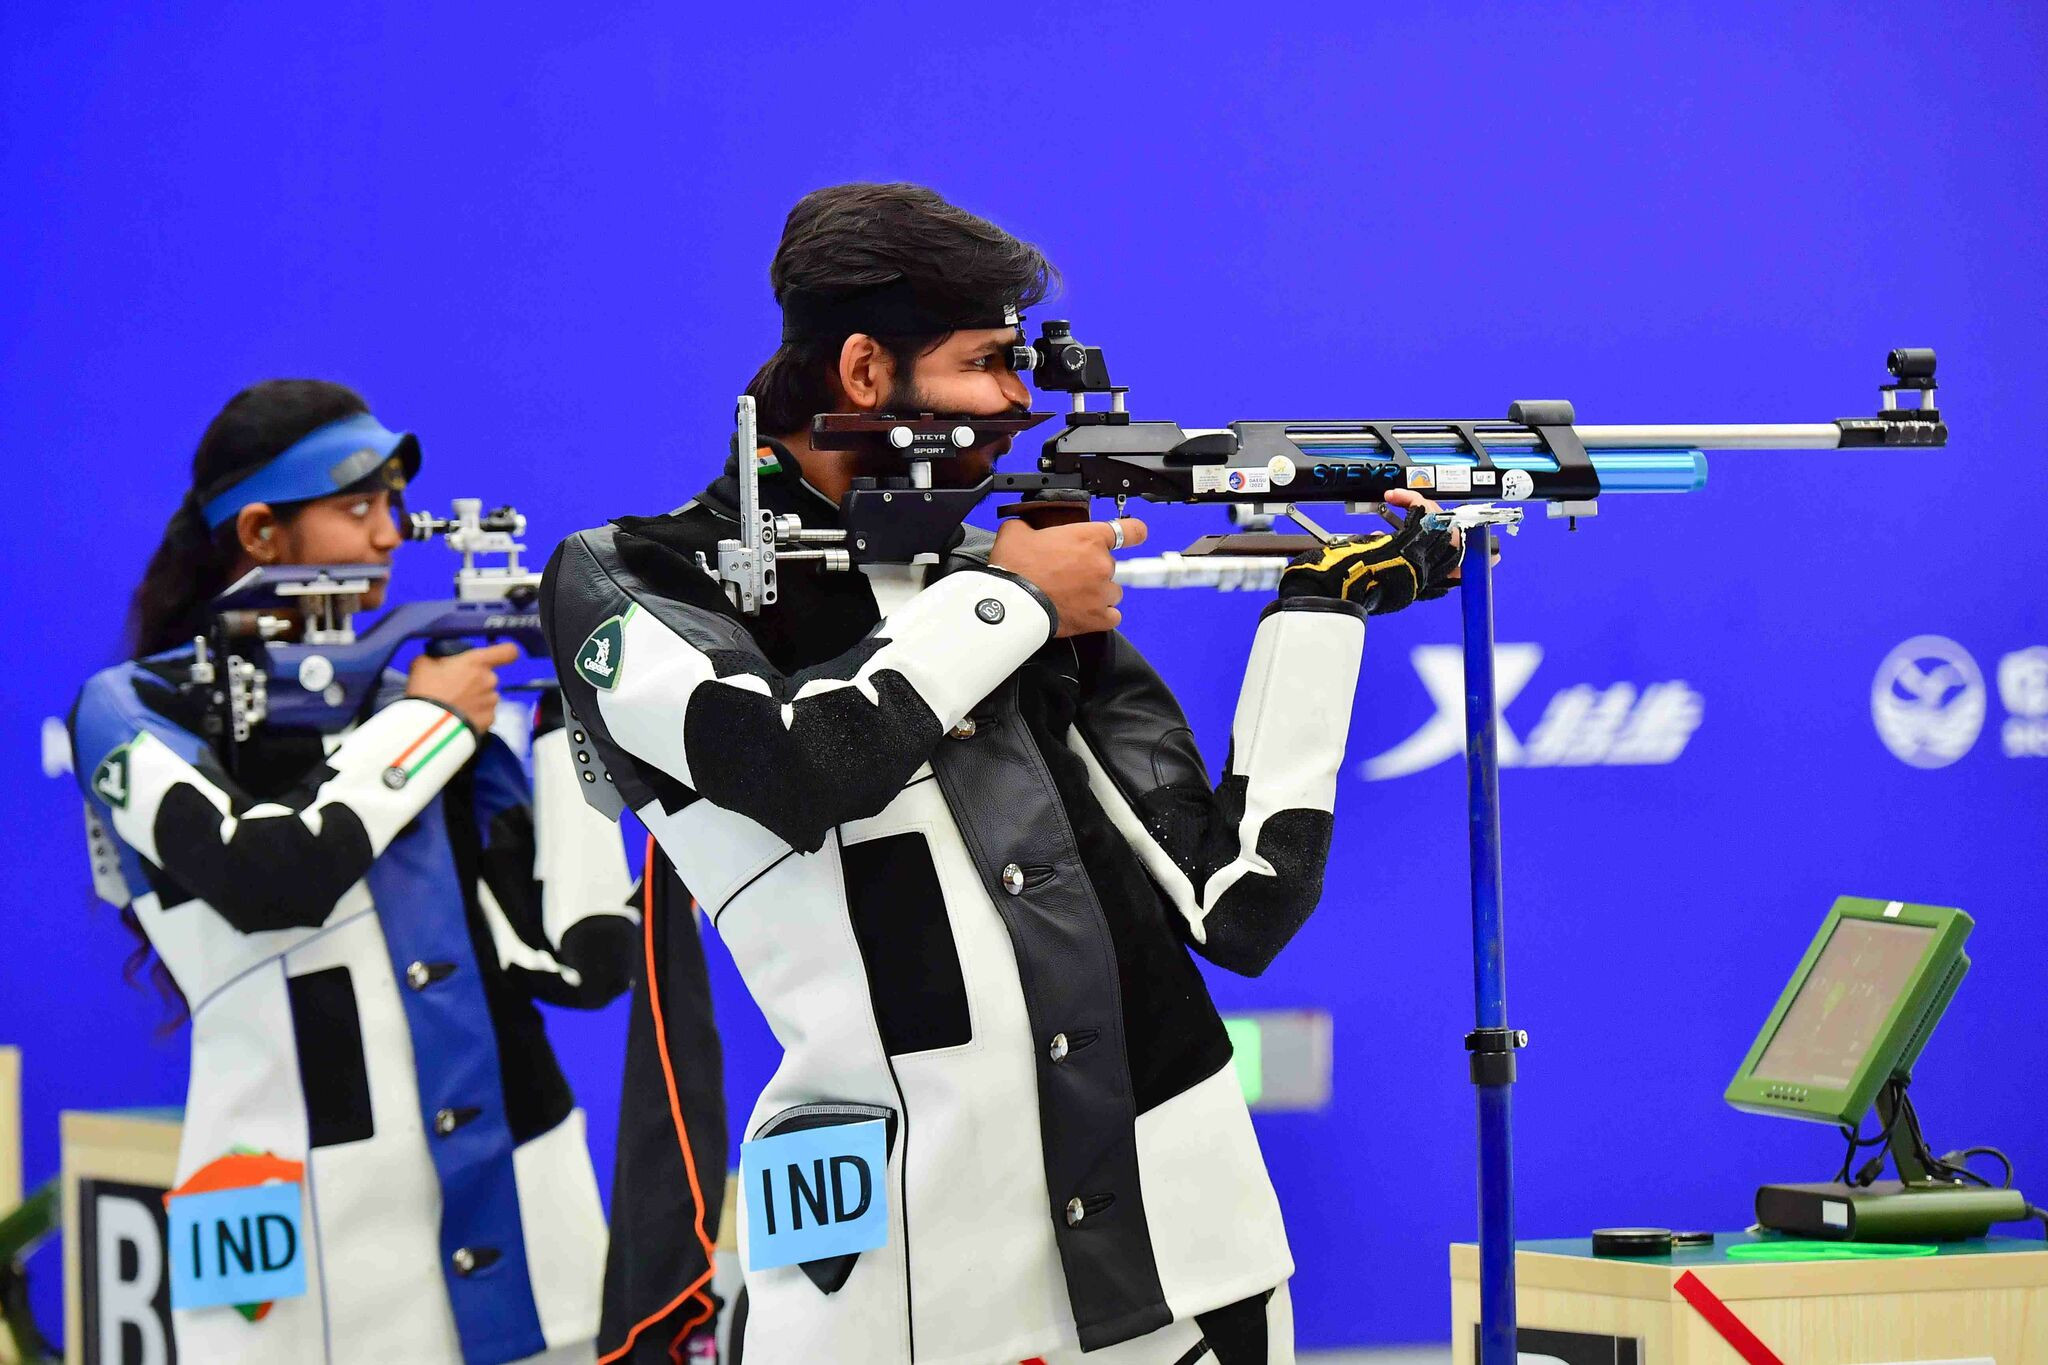 India's best sport at Chengdu 2021 was shooting as it accounted for 14 of the country's 26 medals ©FISU